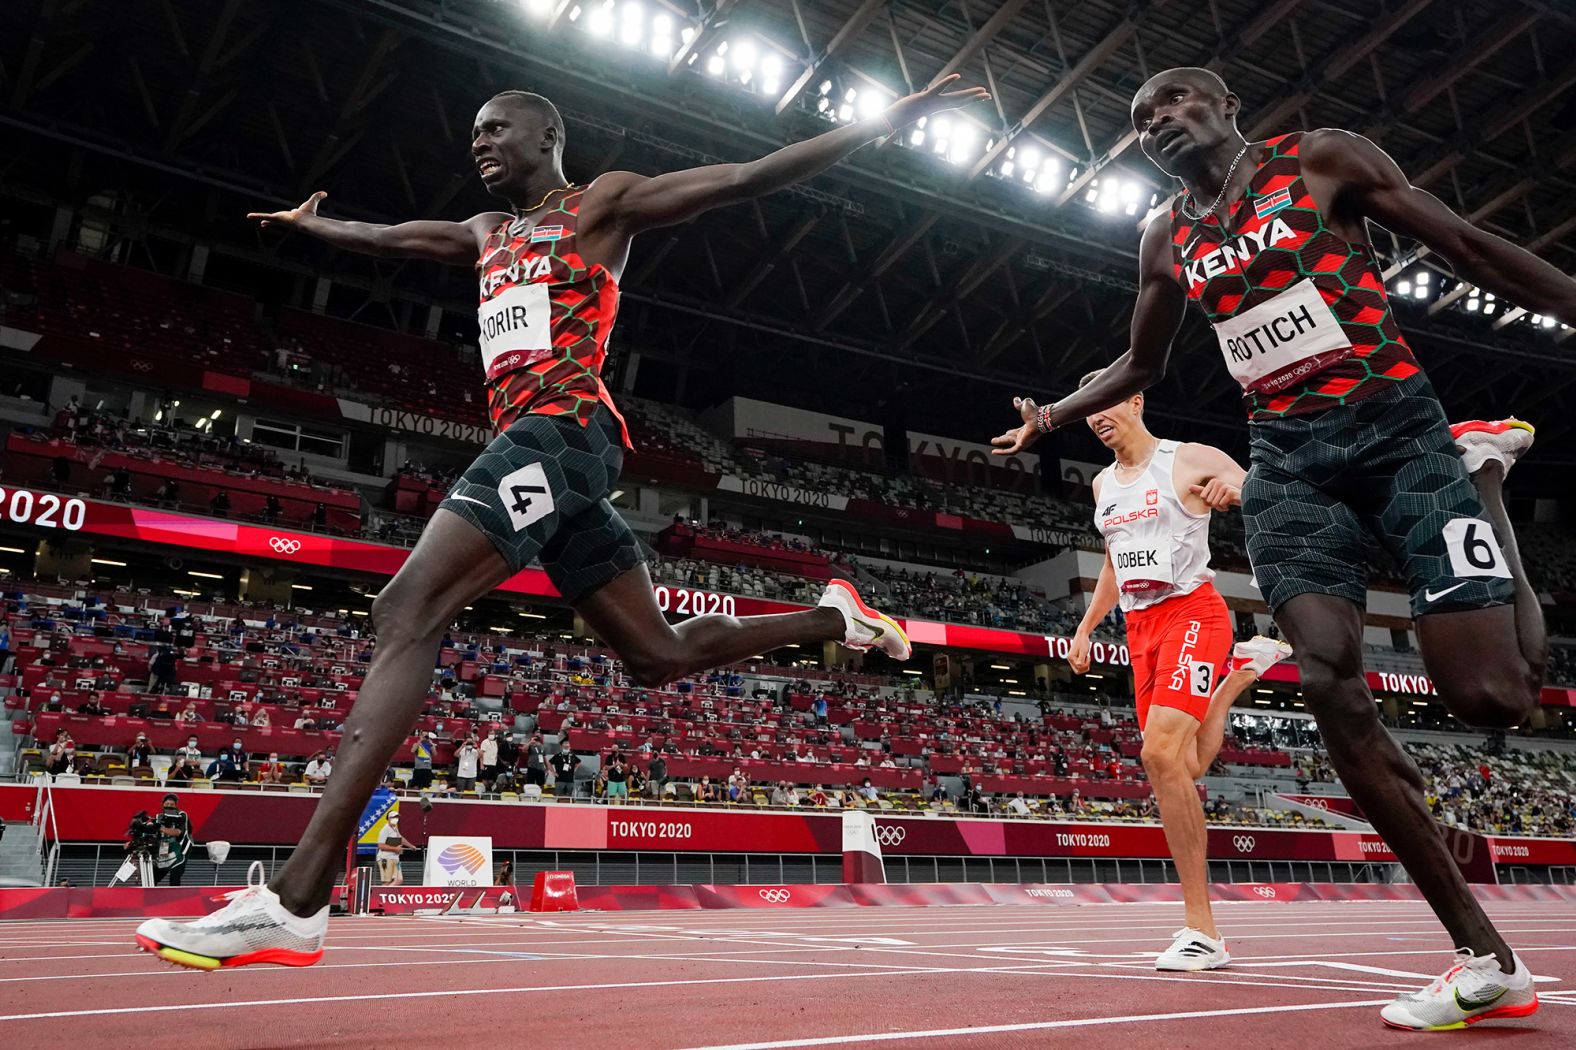 Emmanuel Korir, left, crosses the finish line just ahead of fellow Kenyan Ferguson Rotich <a href="index.php?page=&url=https%3A%2F%2Fwww.cnn.com%2Fworld%2Flive-news%2Ftokyo-2020-olympics-08-04-21-spt%2Fh_0ecaf8fa5aa10f4087557bd3420c96b7" target="_blank">to win gold in the 800 meters</a> on August 4. Kenyan runners have won the 800 at the last four Olympics.